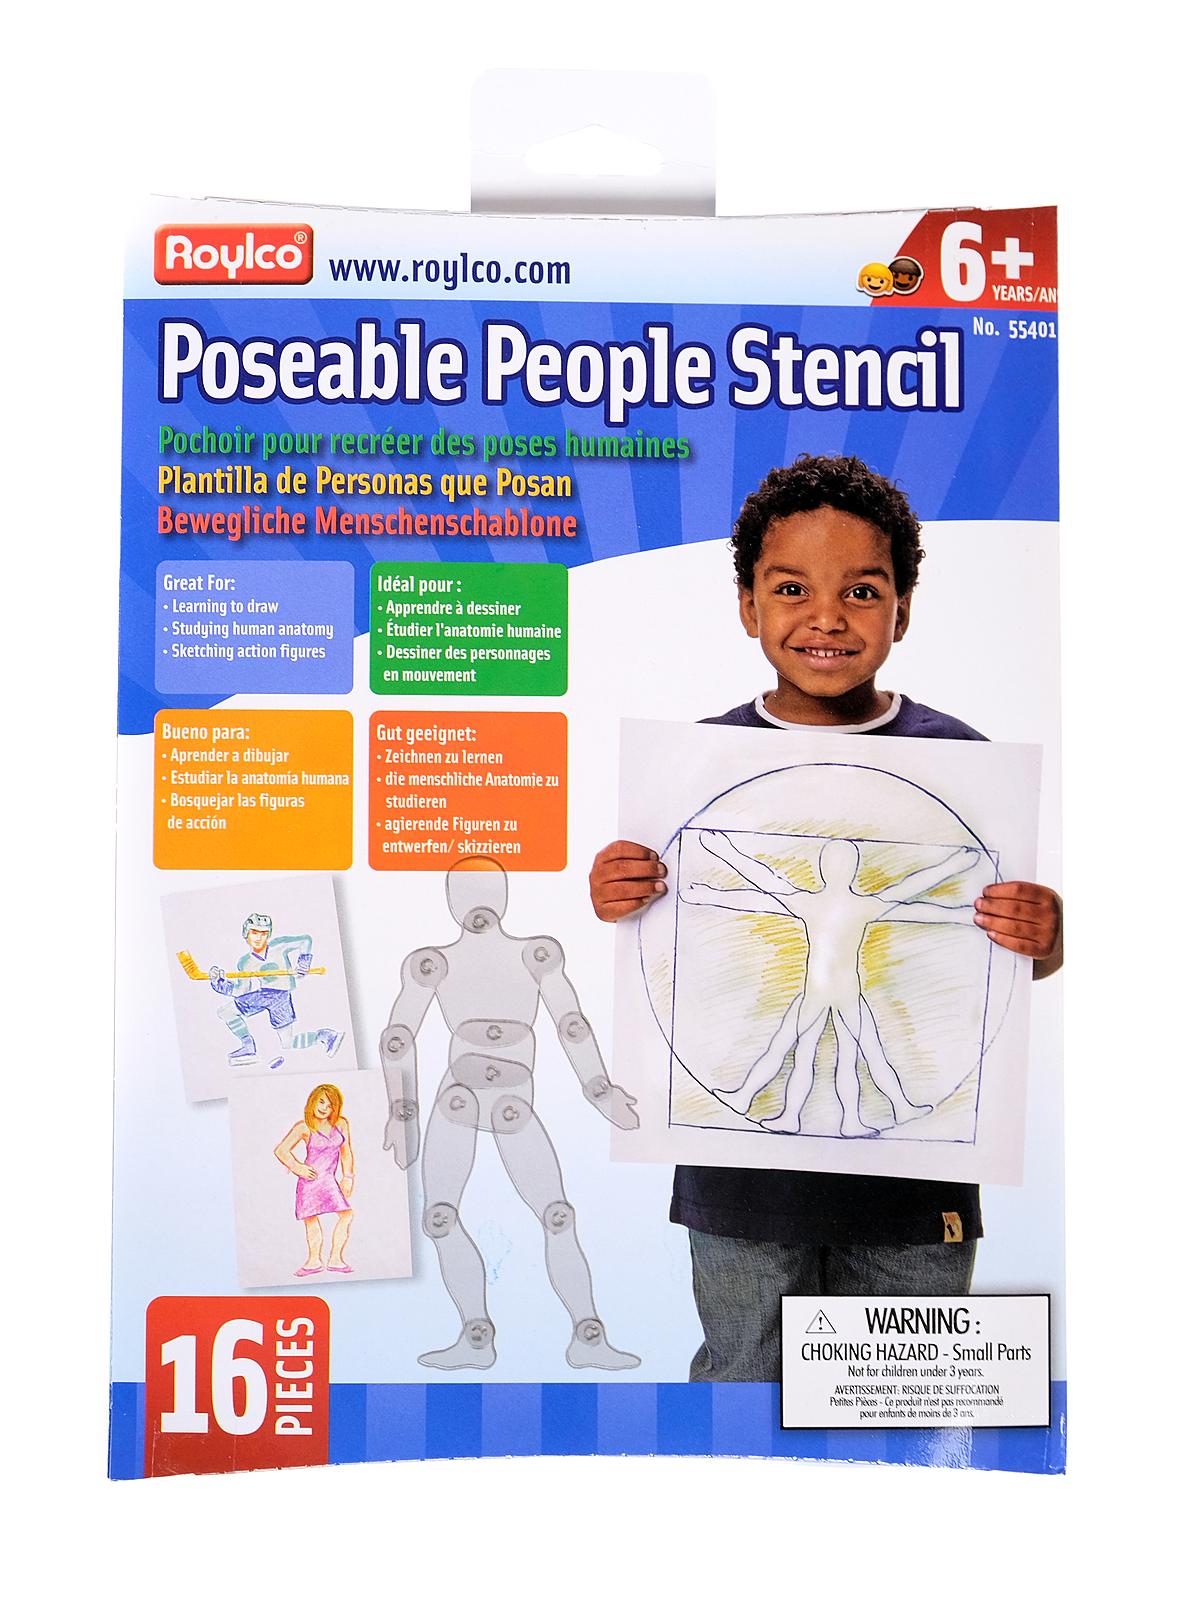 Posable People Stencil Each